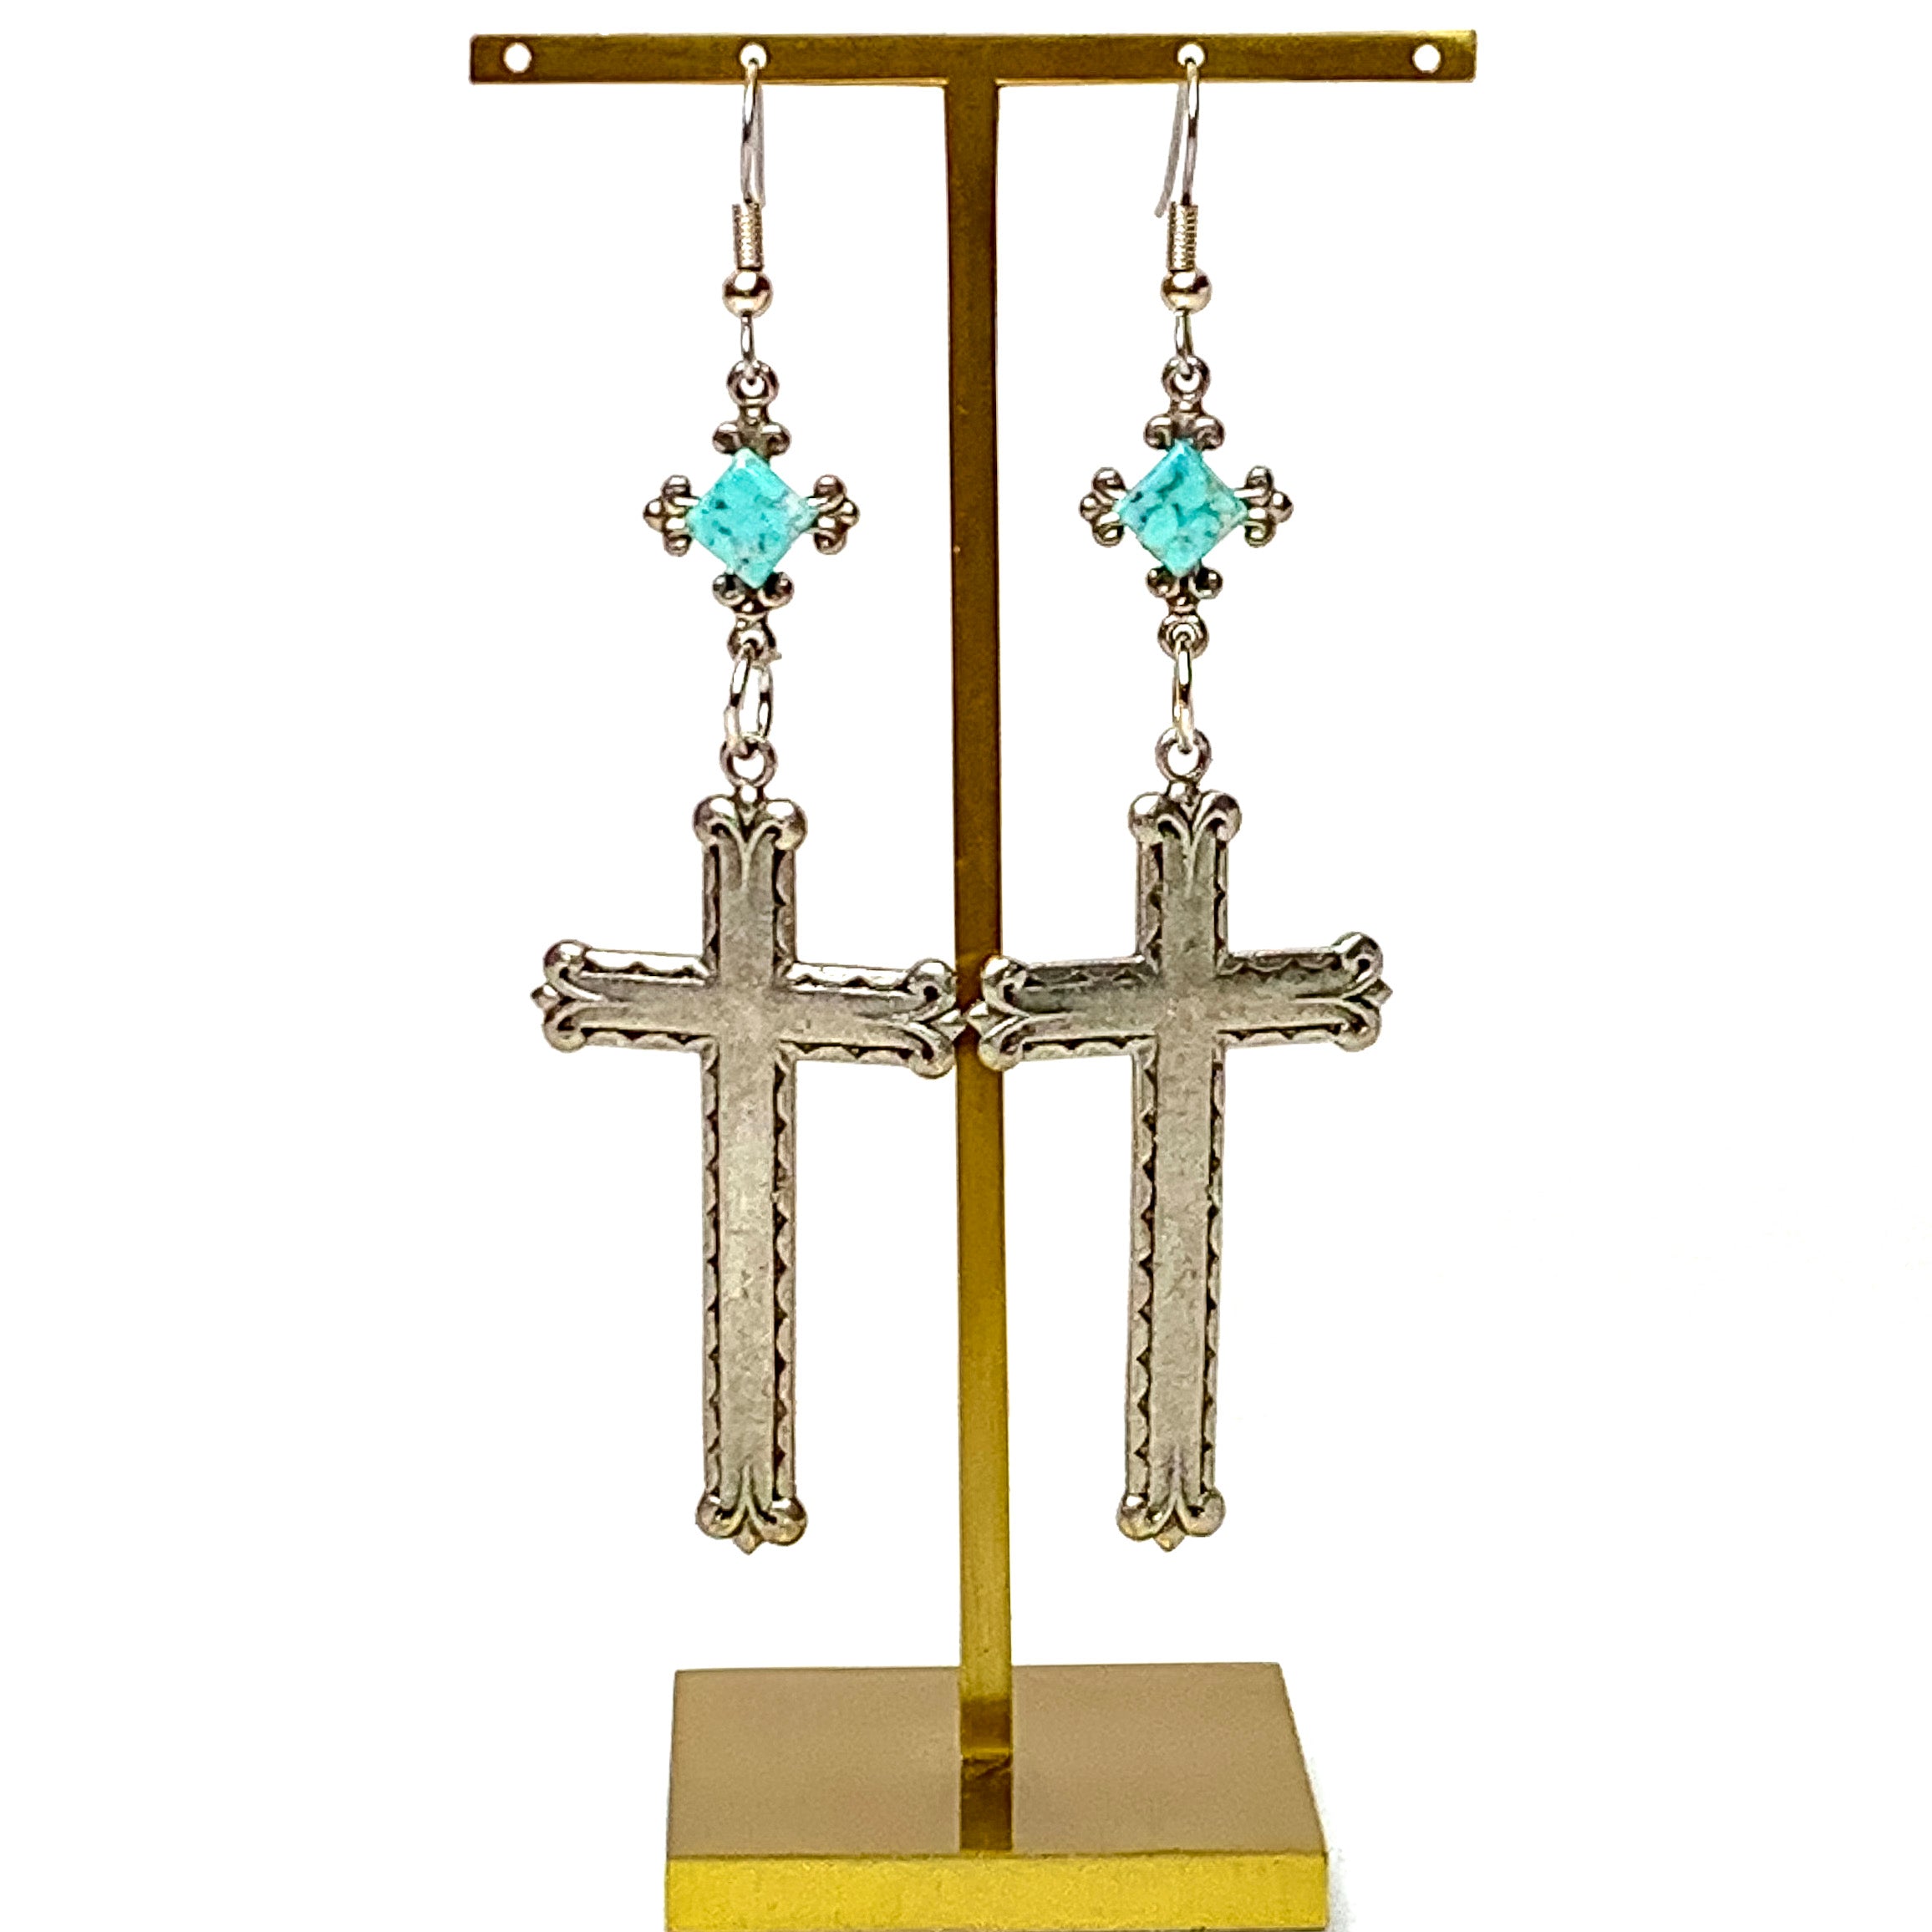 Heavenly Harmony Silver Tone Cross Drop Earrings with Faux Turquoise Accents